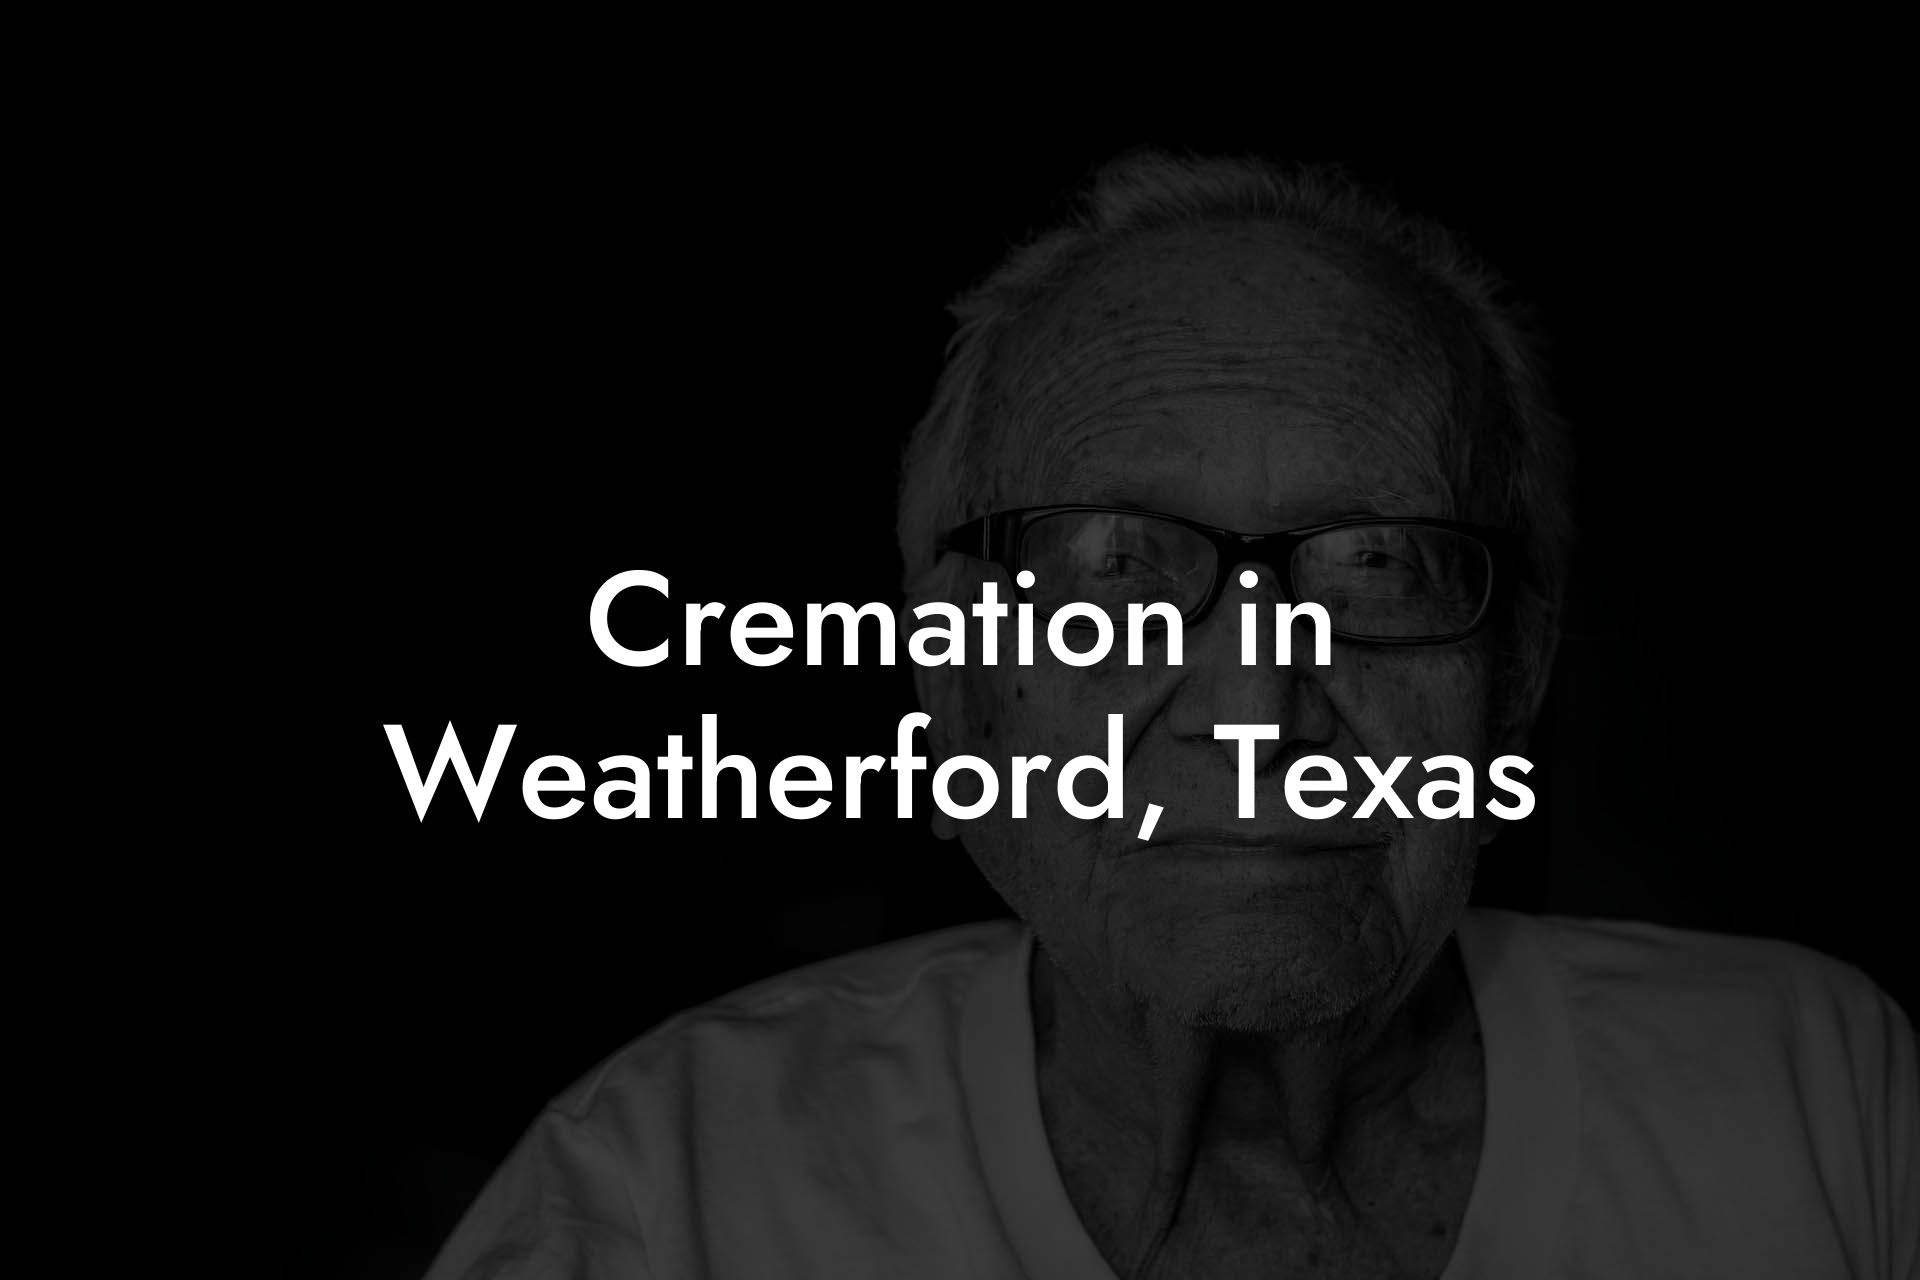 Cremation in Weatherford, Texas